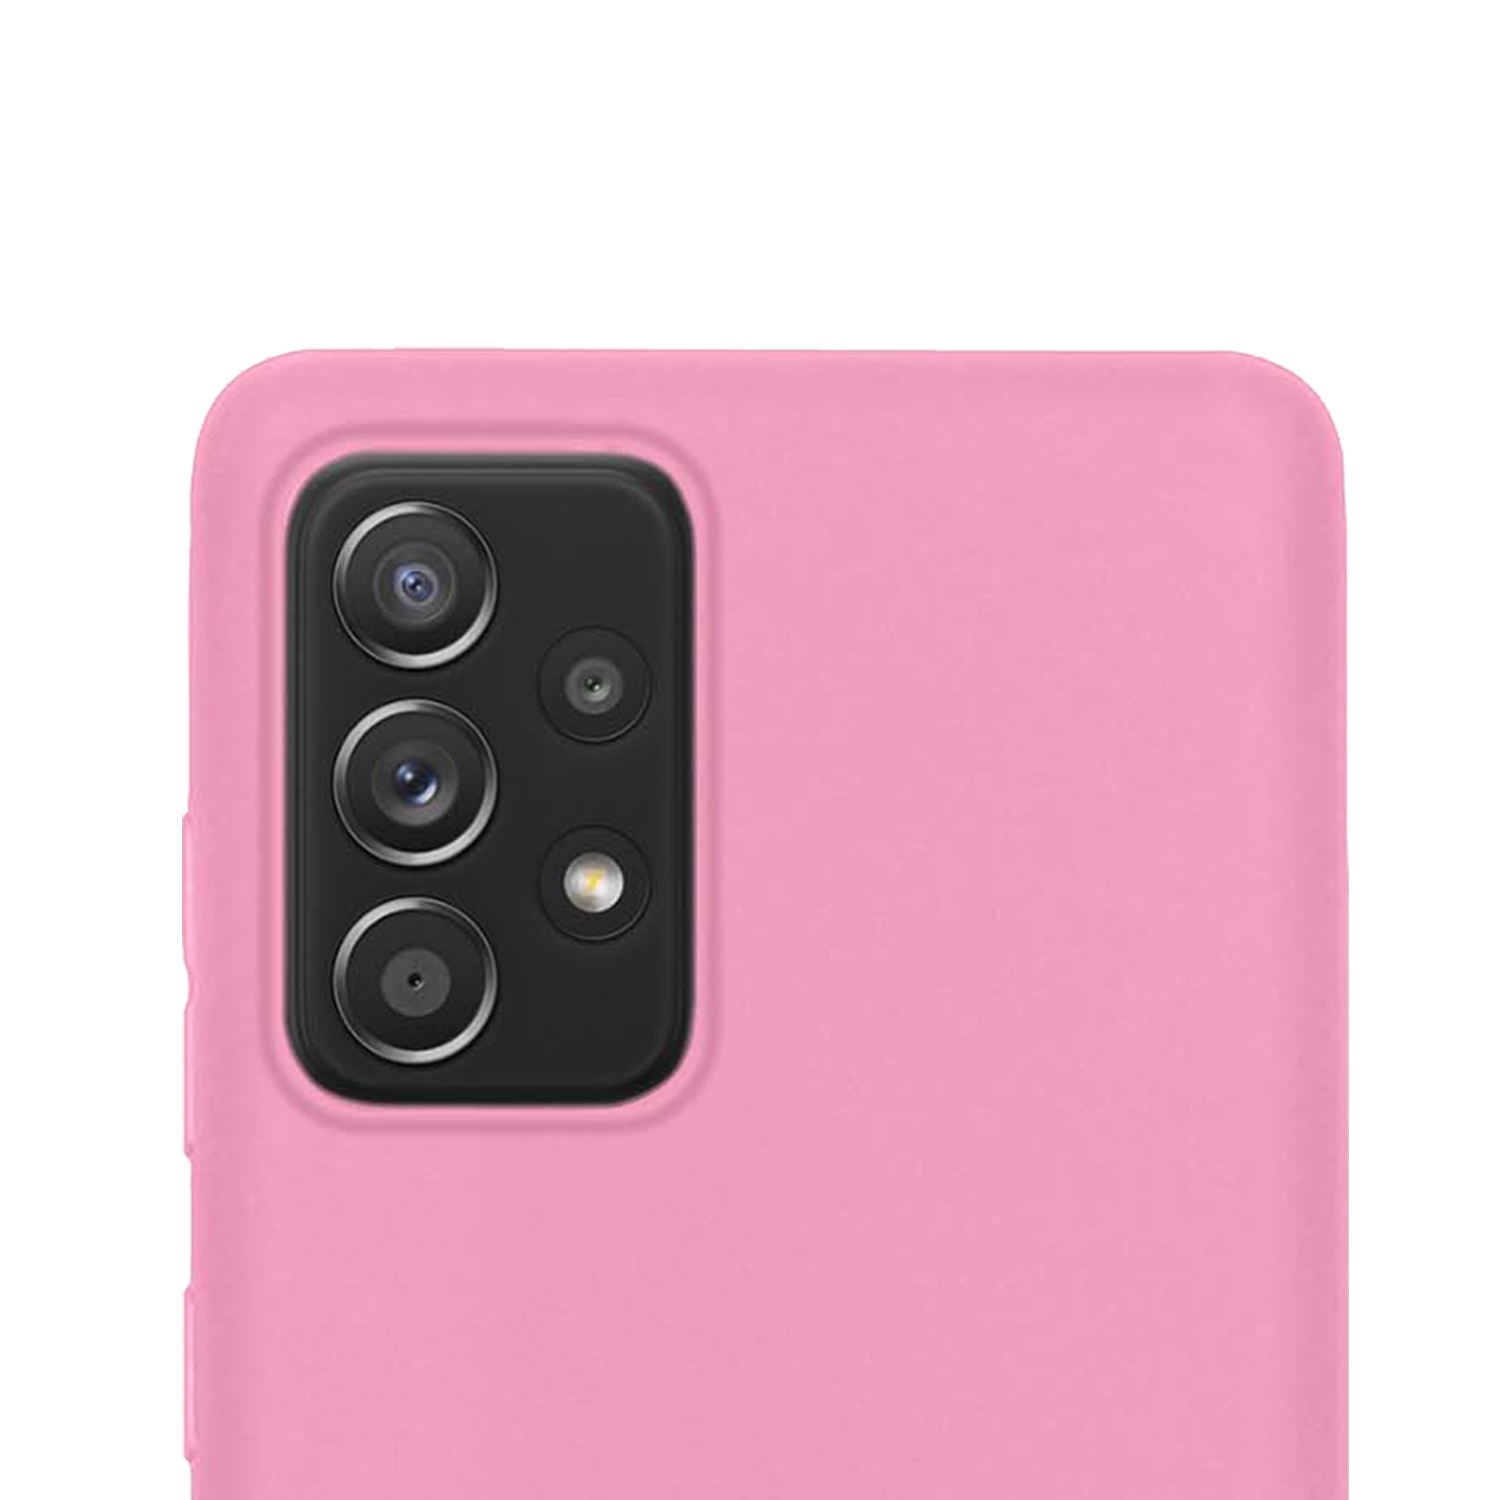 Samsung Galaxy A53 Hoesje Back Cover Siliconen Case Hoes - Licht Roze - 2x